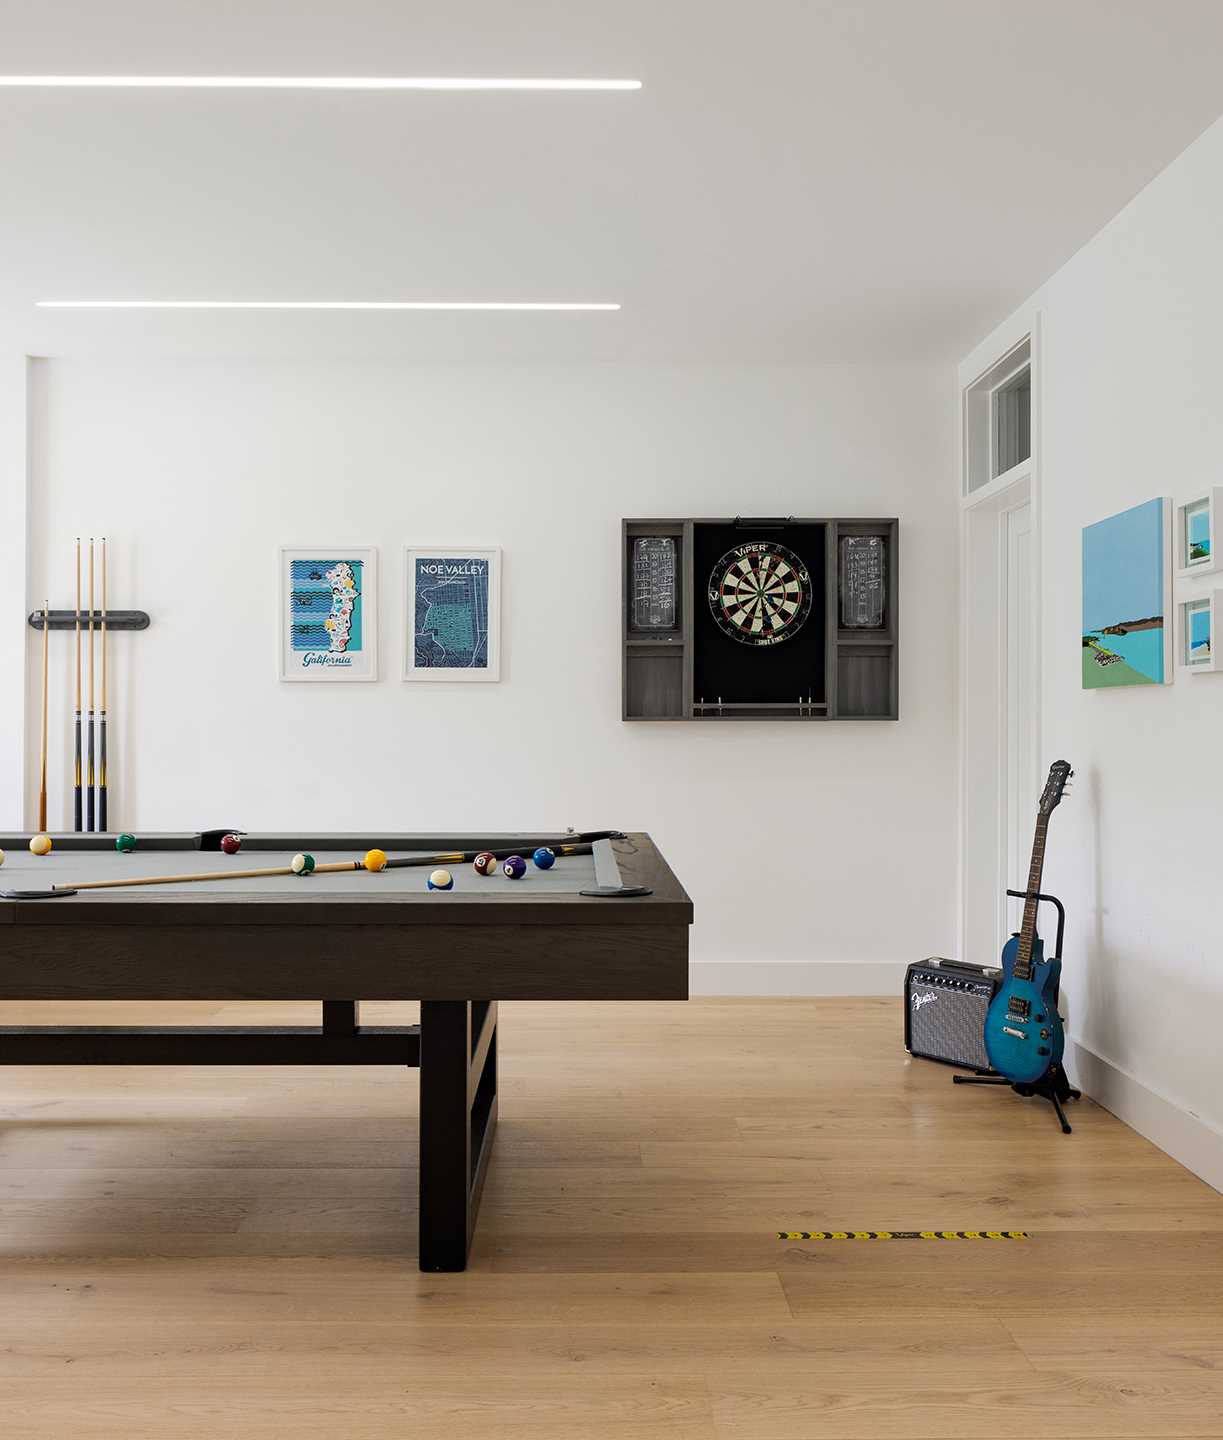 The basement of this renovated home which opens to the garden ,is used for games and as a gym.